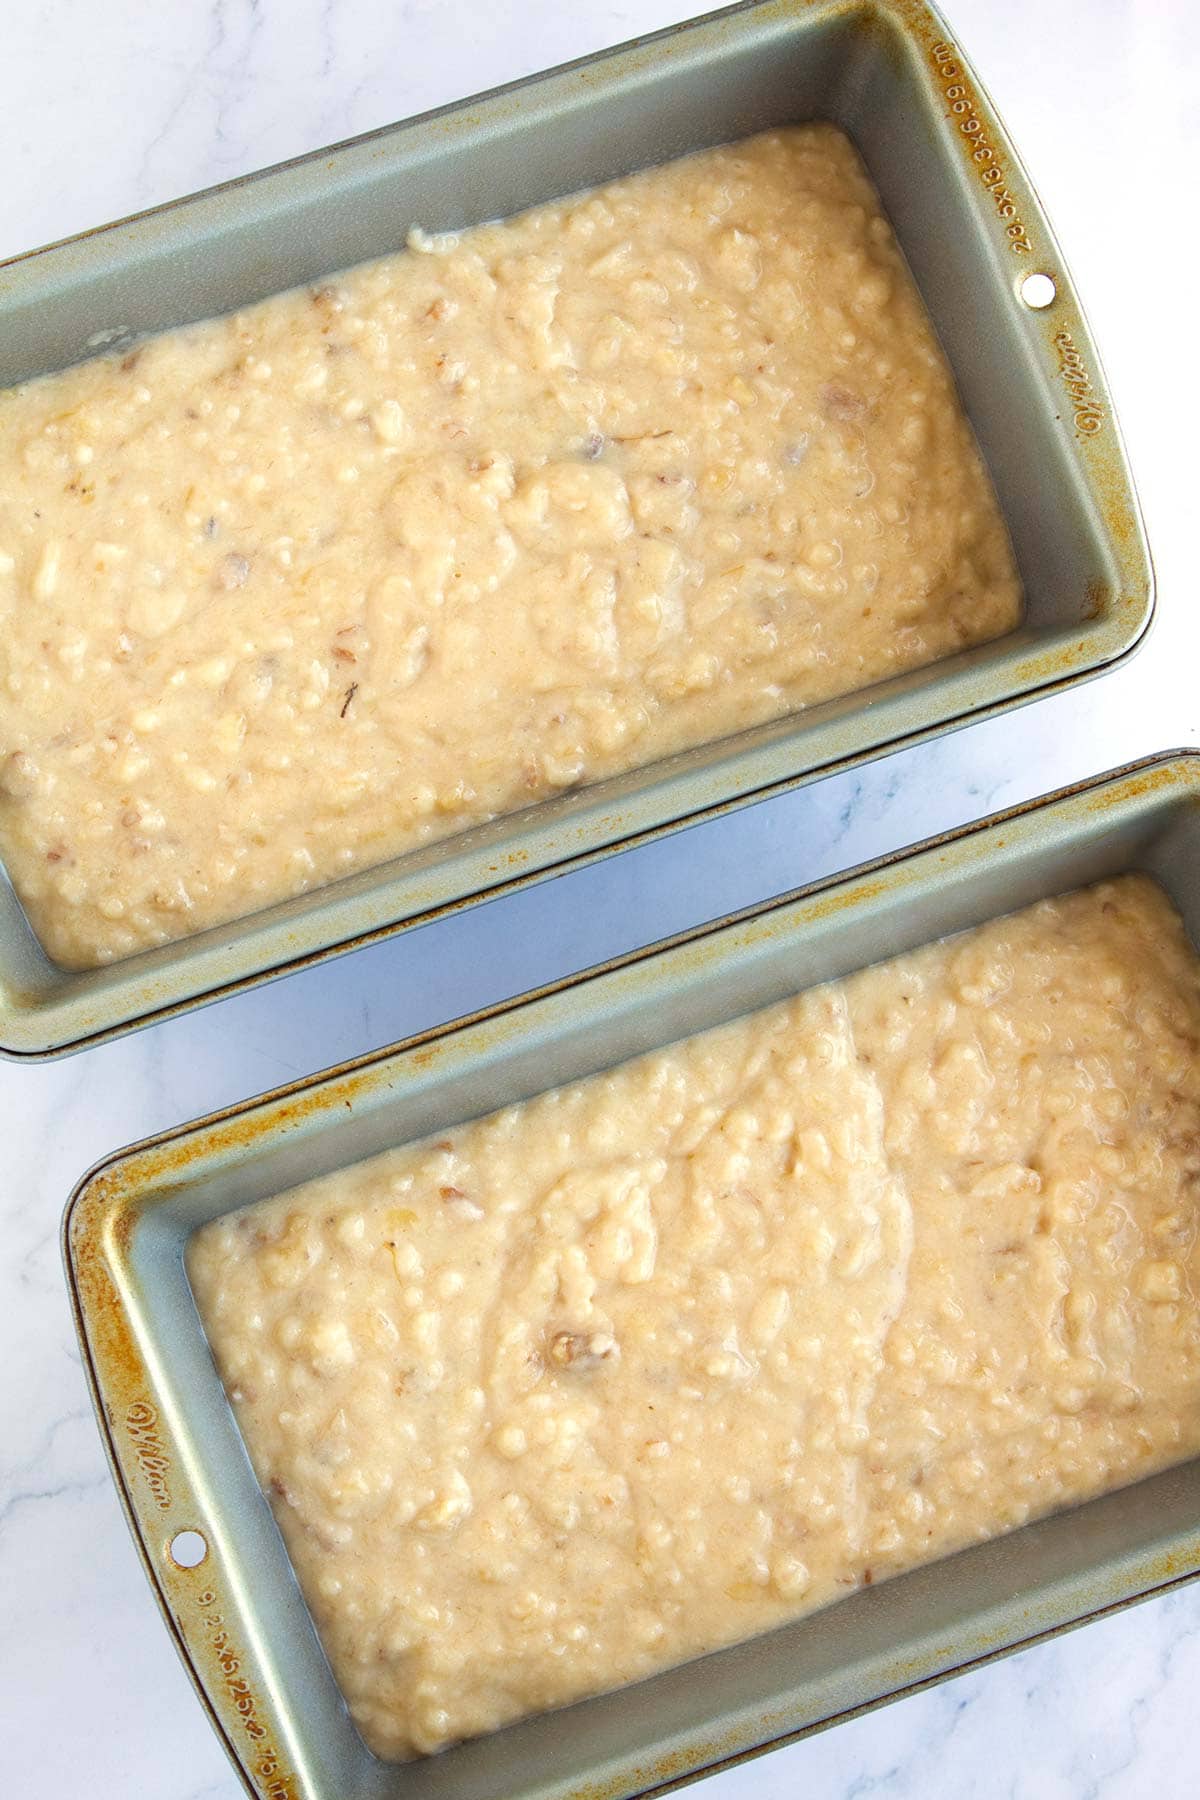 Two loaves of banana bread batter in prepared loaf pans.